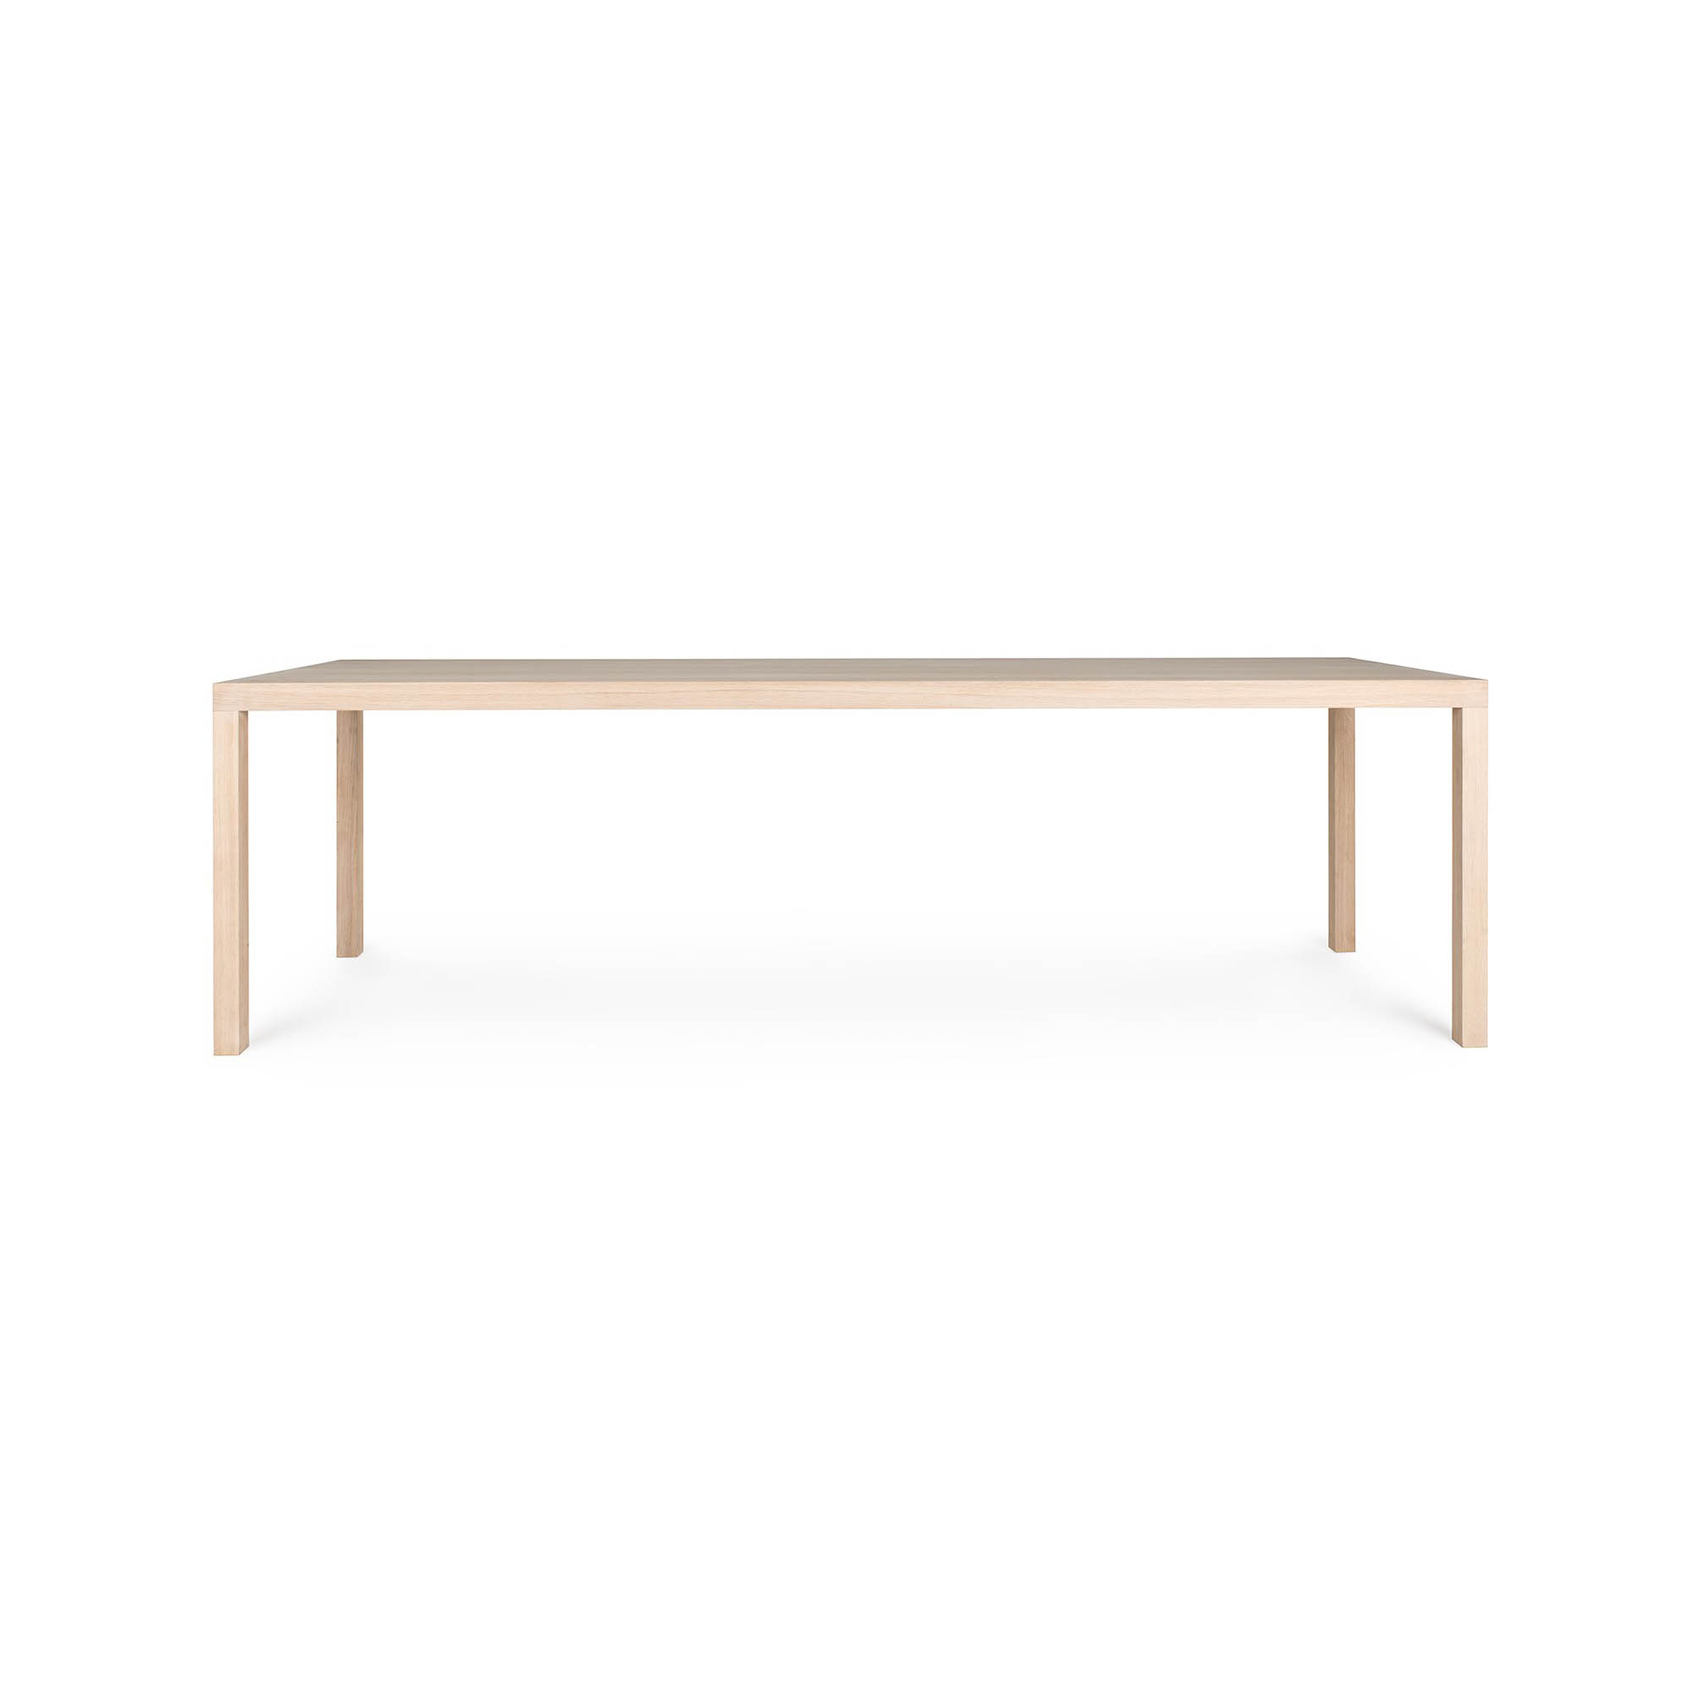 MVS T88W is one of James Mair's top five minimalist furniture choices